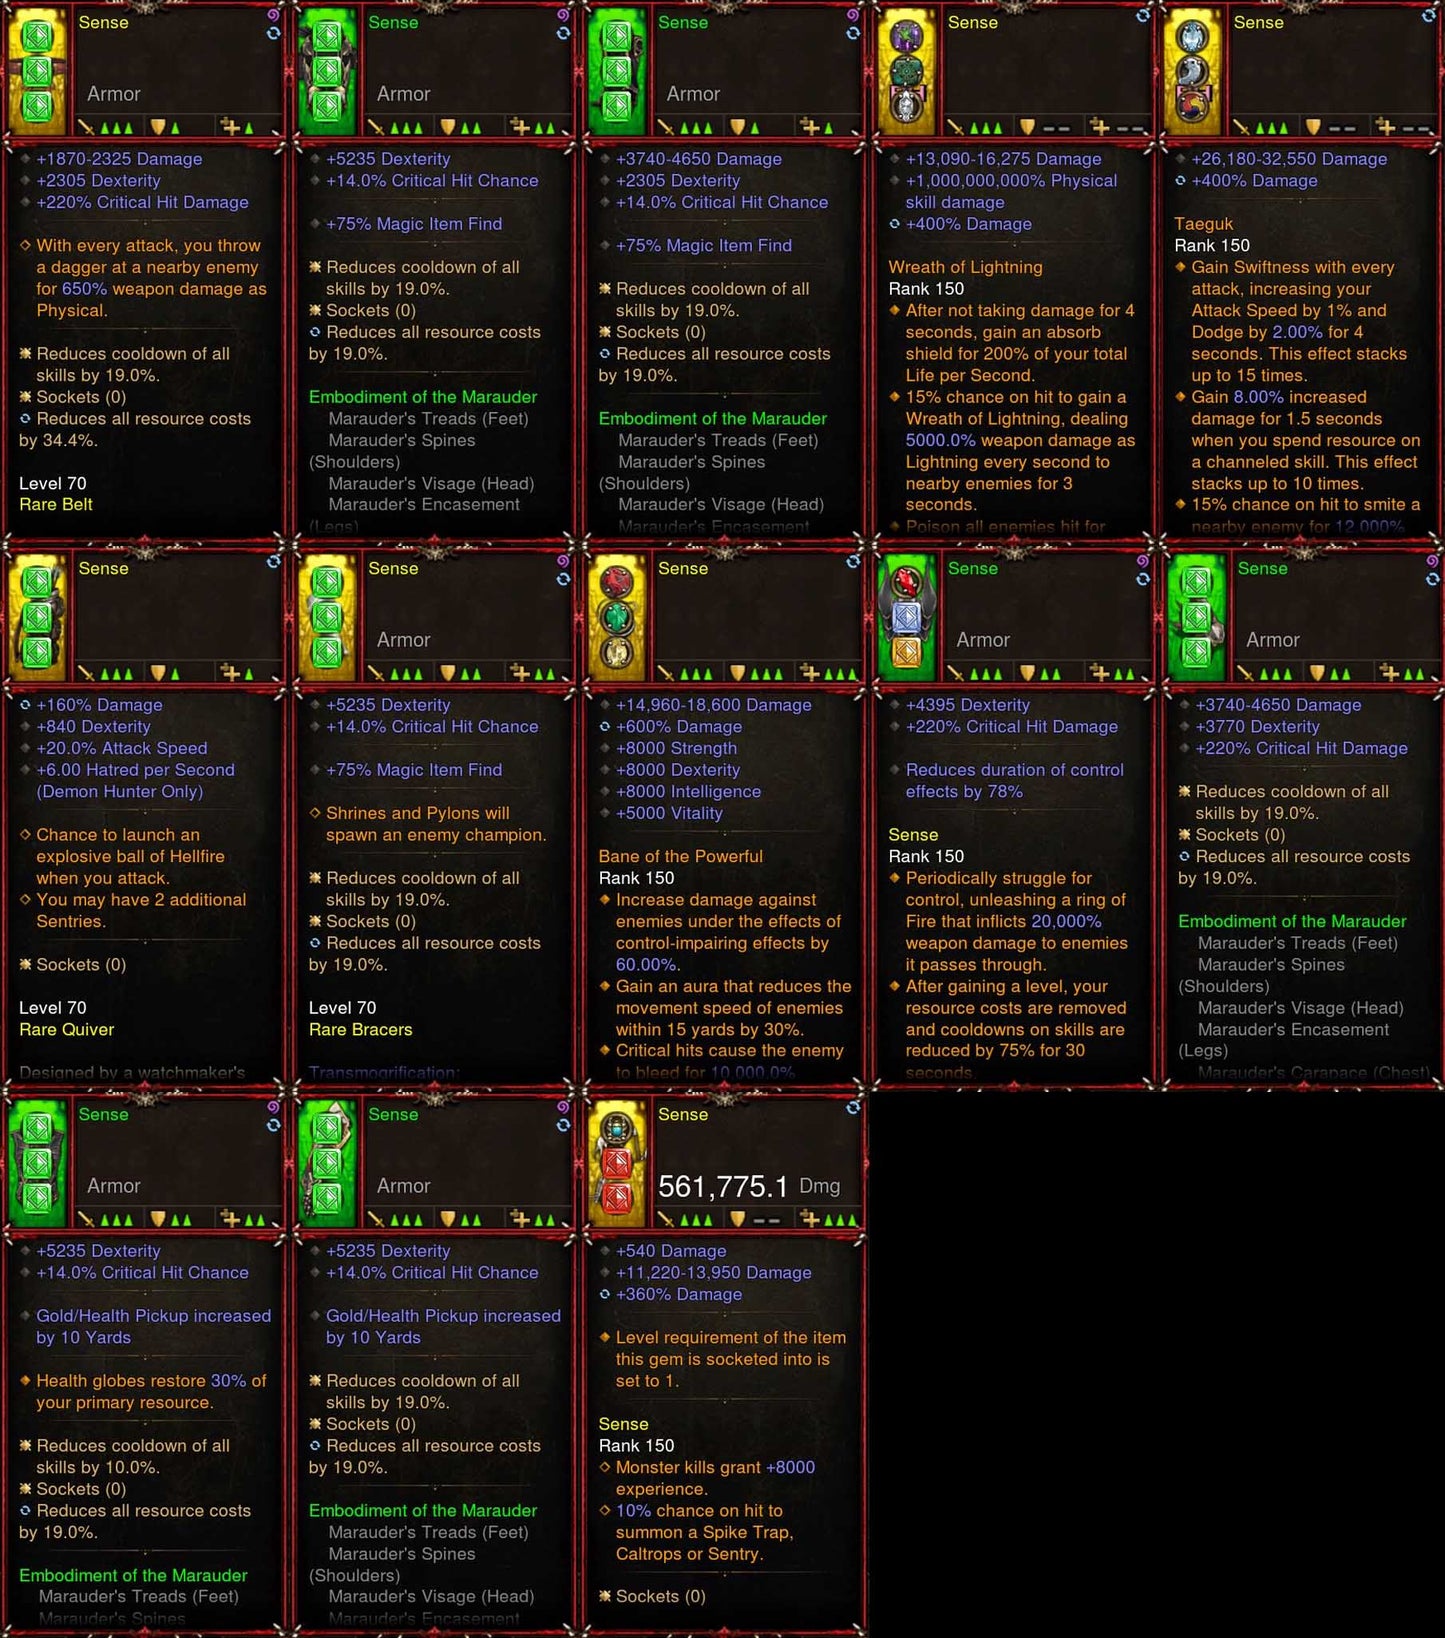 [Primal Ancient] [Quad DPS] Diablo 3 Immortal v5 Demon Hunter Marauder gRift 150 (Magic Find, High CDR, RR) Sense Diablo 3 Mods ROS Seasonal and Non Seasonal Save Mod - Modded Items and Gear - Hacks - Cheats - Trainers for Playstation 4 - Playstation 5 - Nintendo Switch - Xbox One